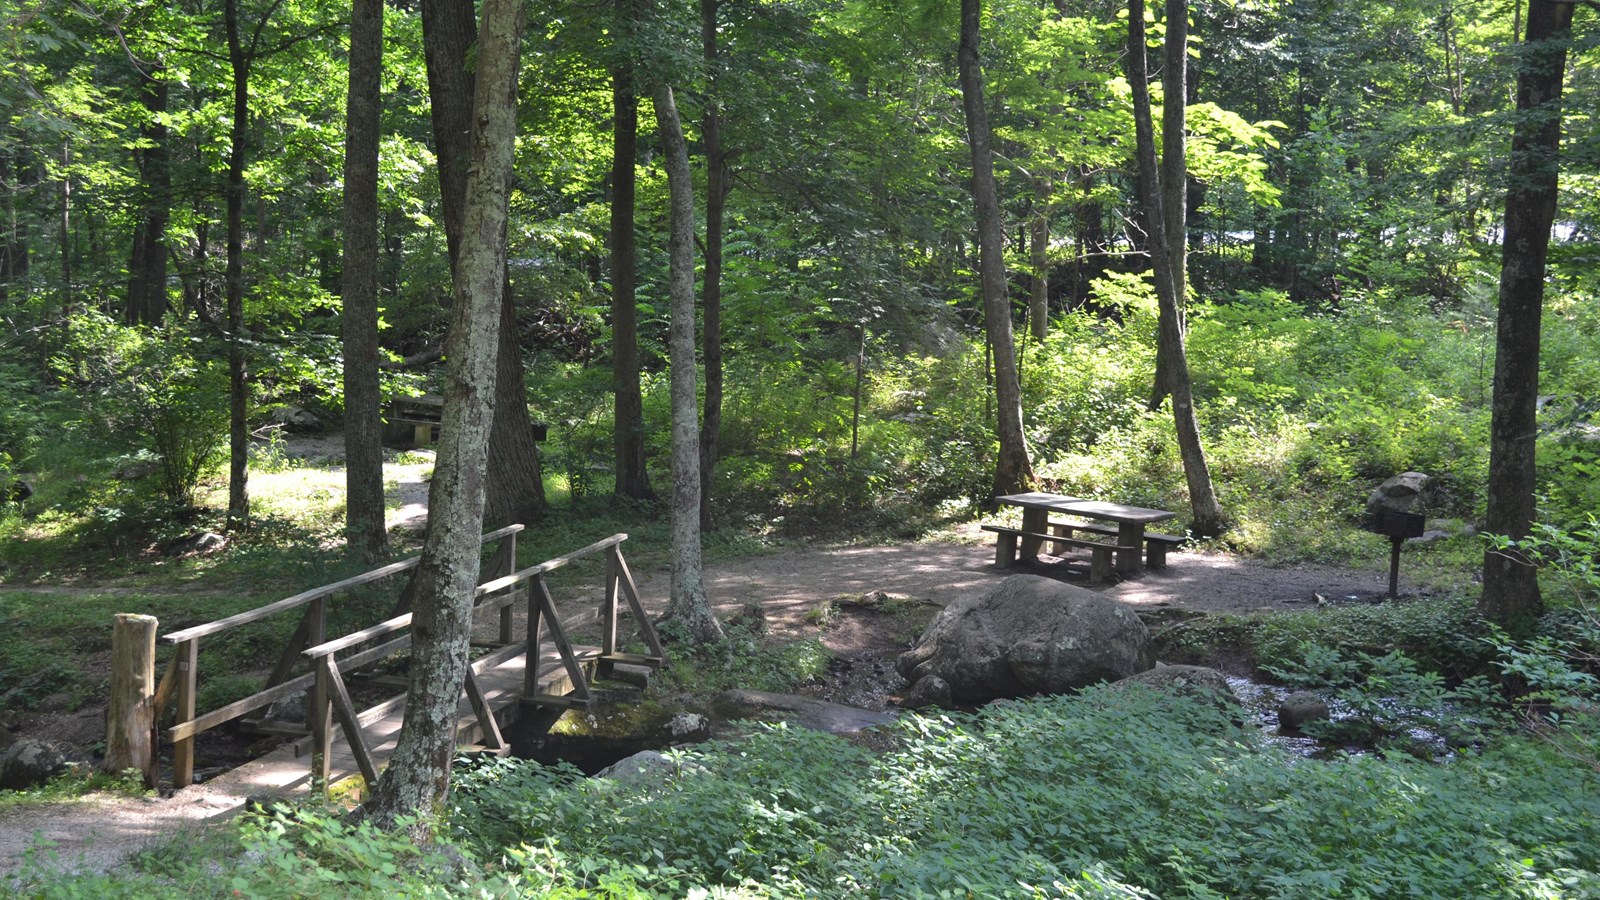 A wooden bridge leads over a small creek to a picnic table in the shade of tall trees. 